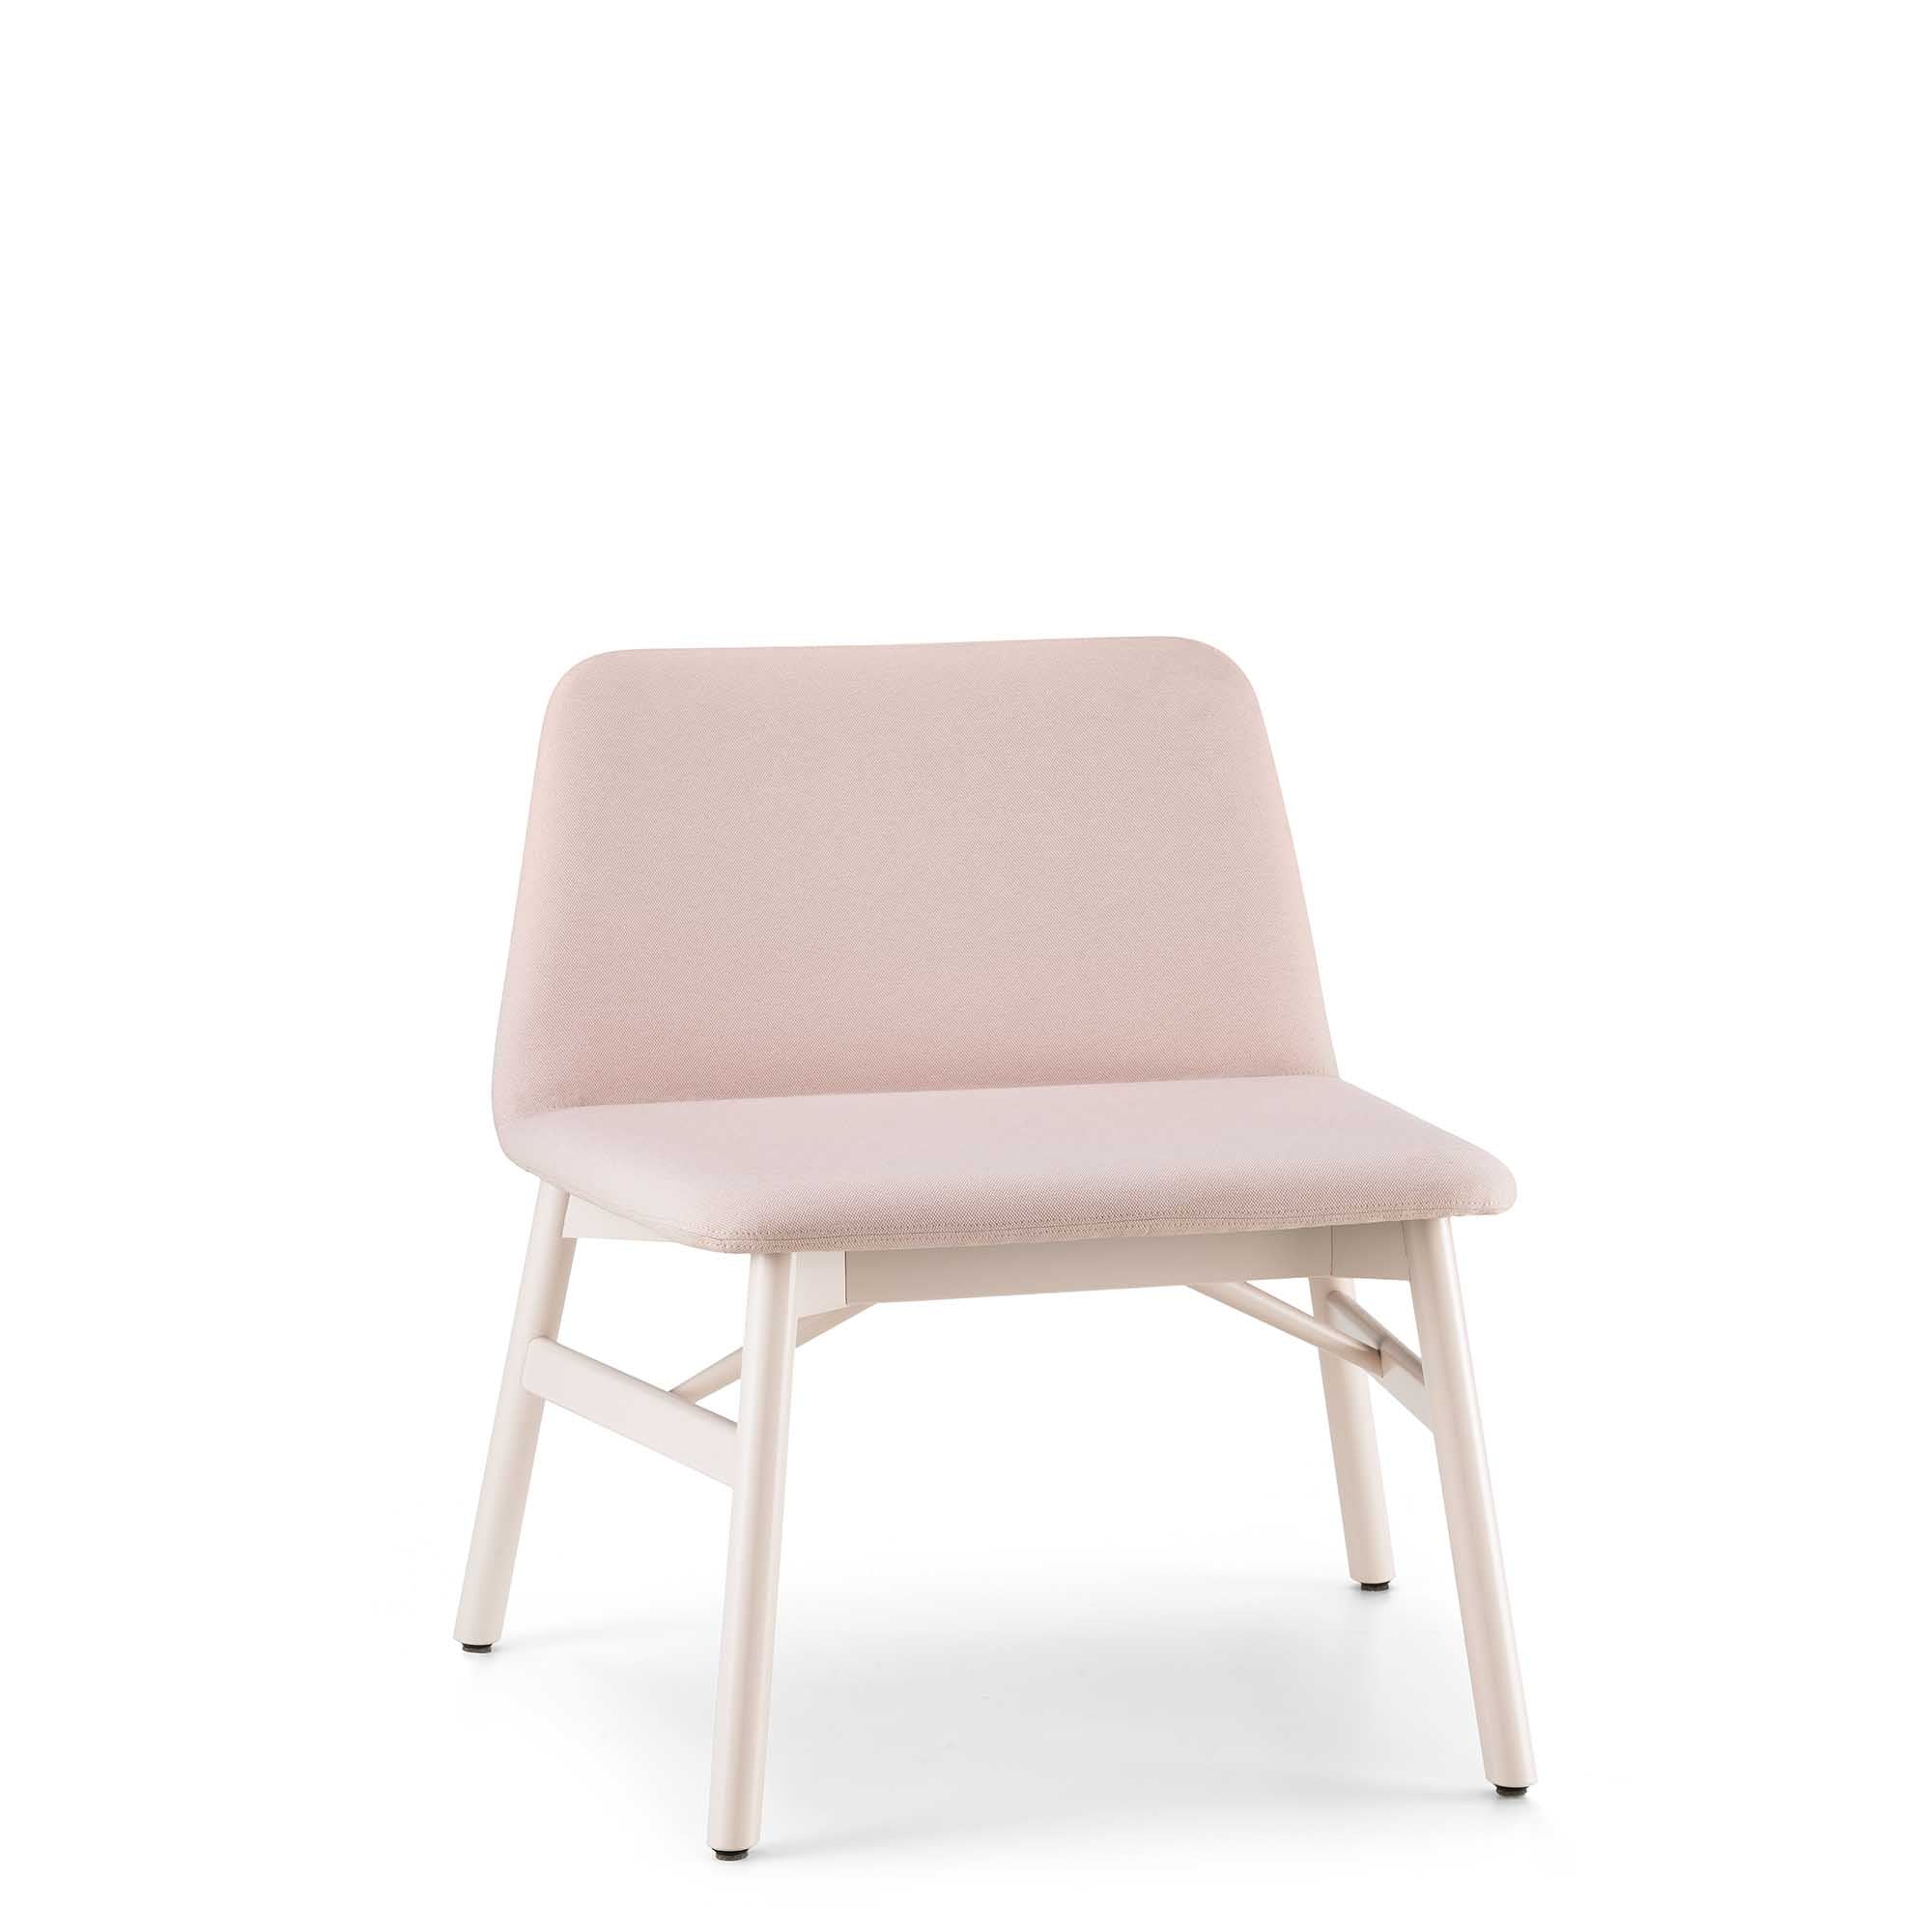 BARDOT LE LOUNGE Armchair cream upholstery, front view